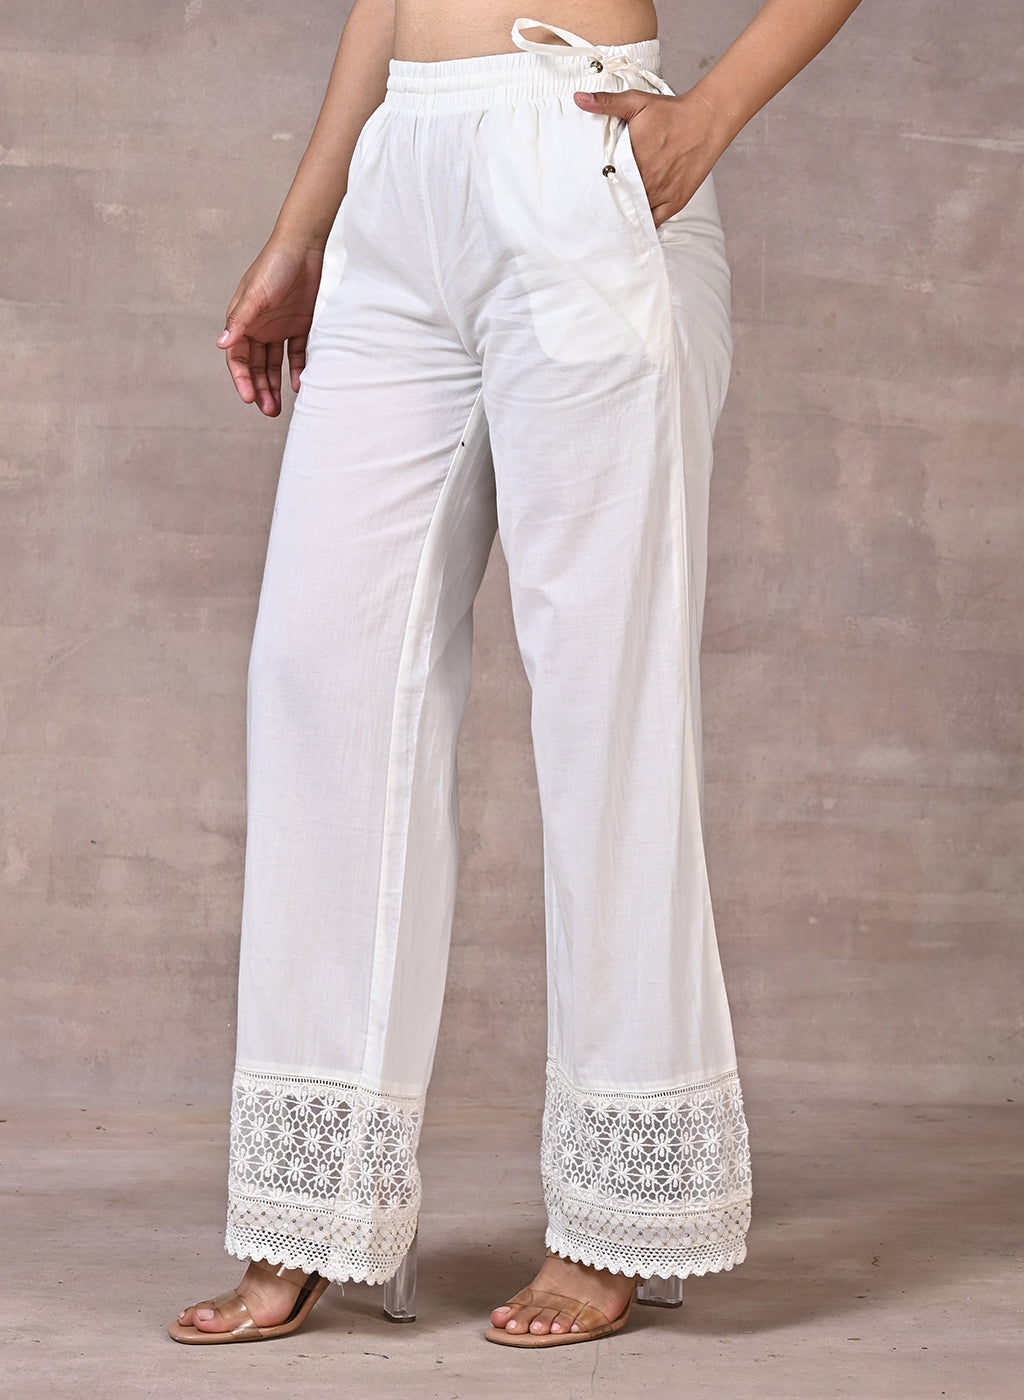 Off White Palazzos With Shimmery Details At The Hems